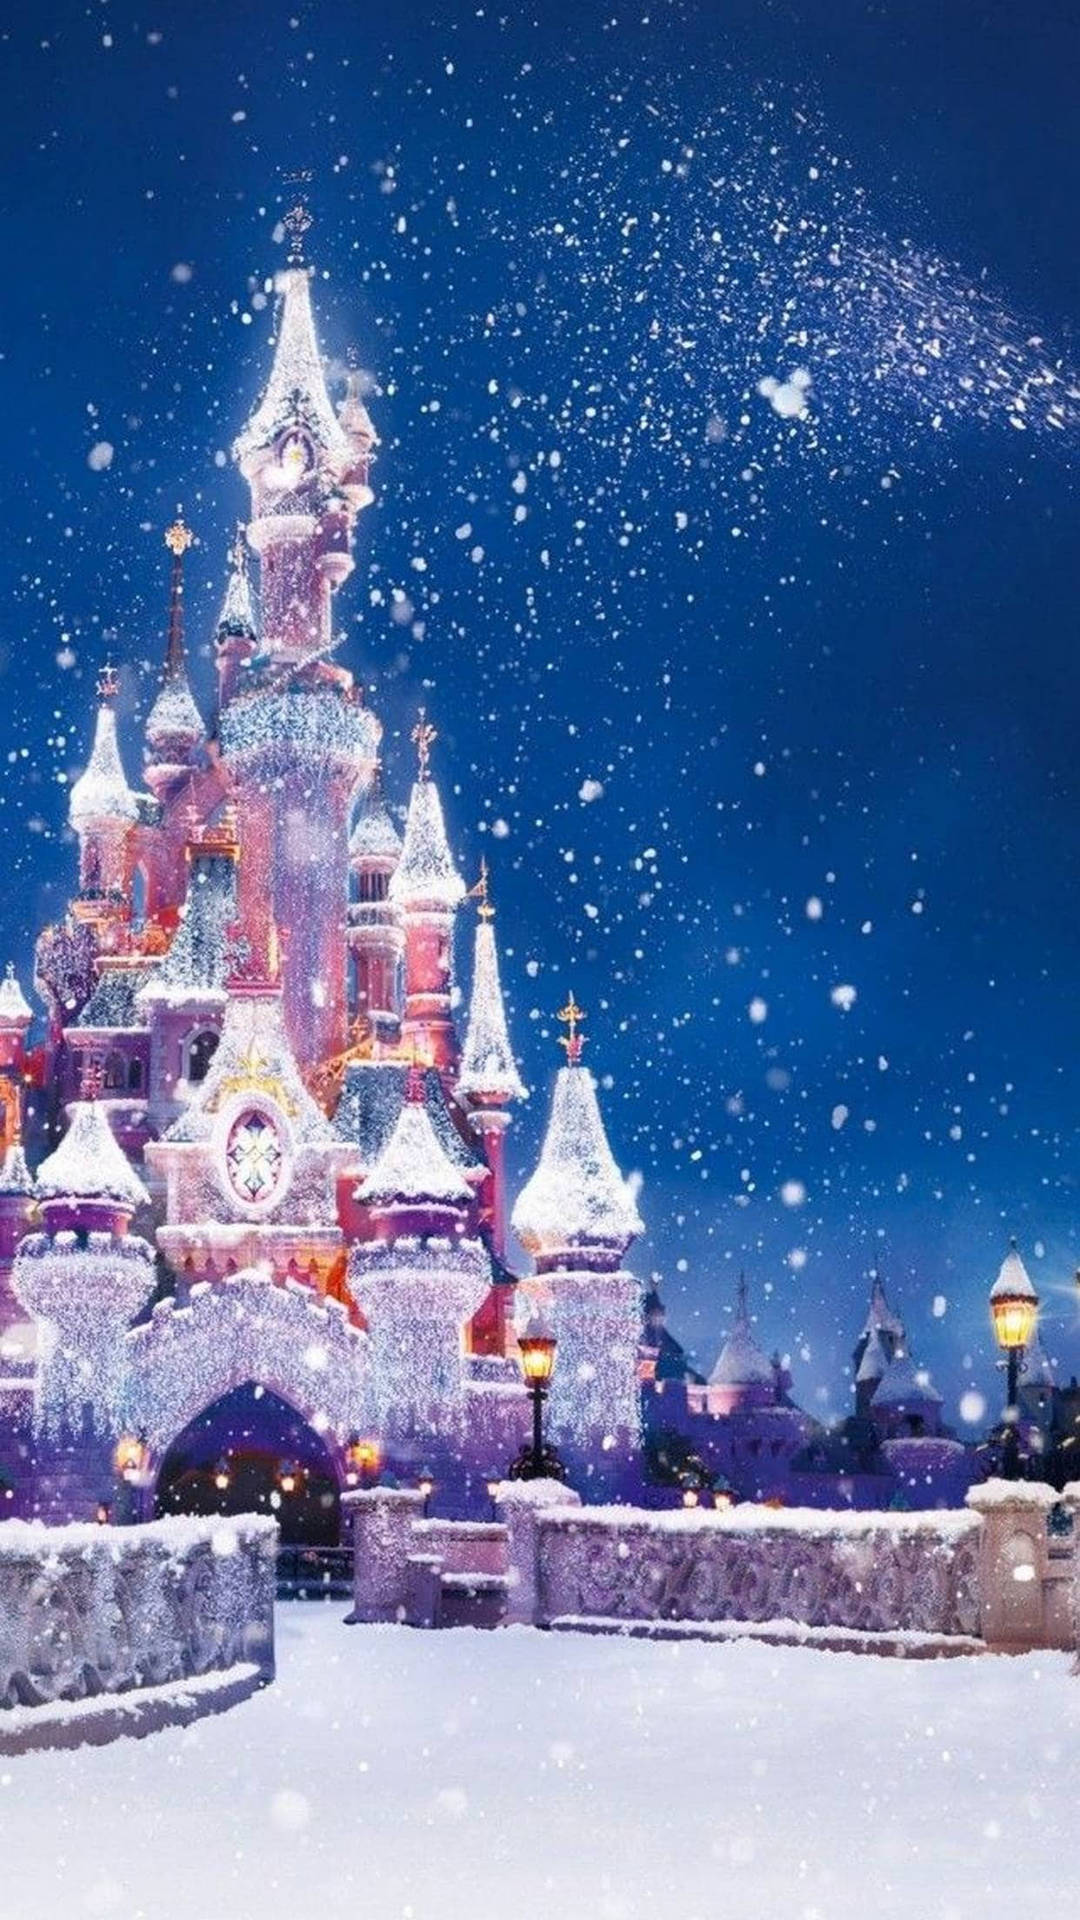 Download Snow Castle Aesthetic Christmas iPhone Wallpaper